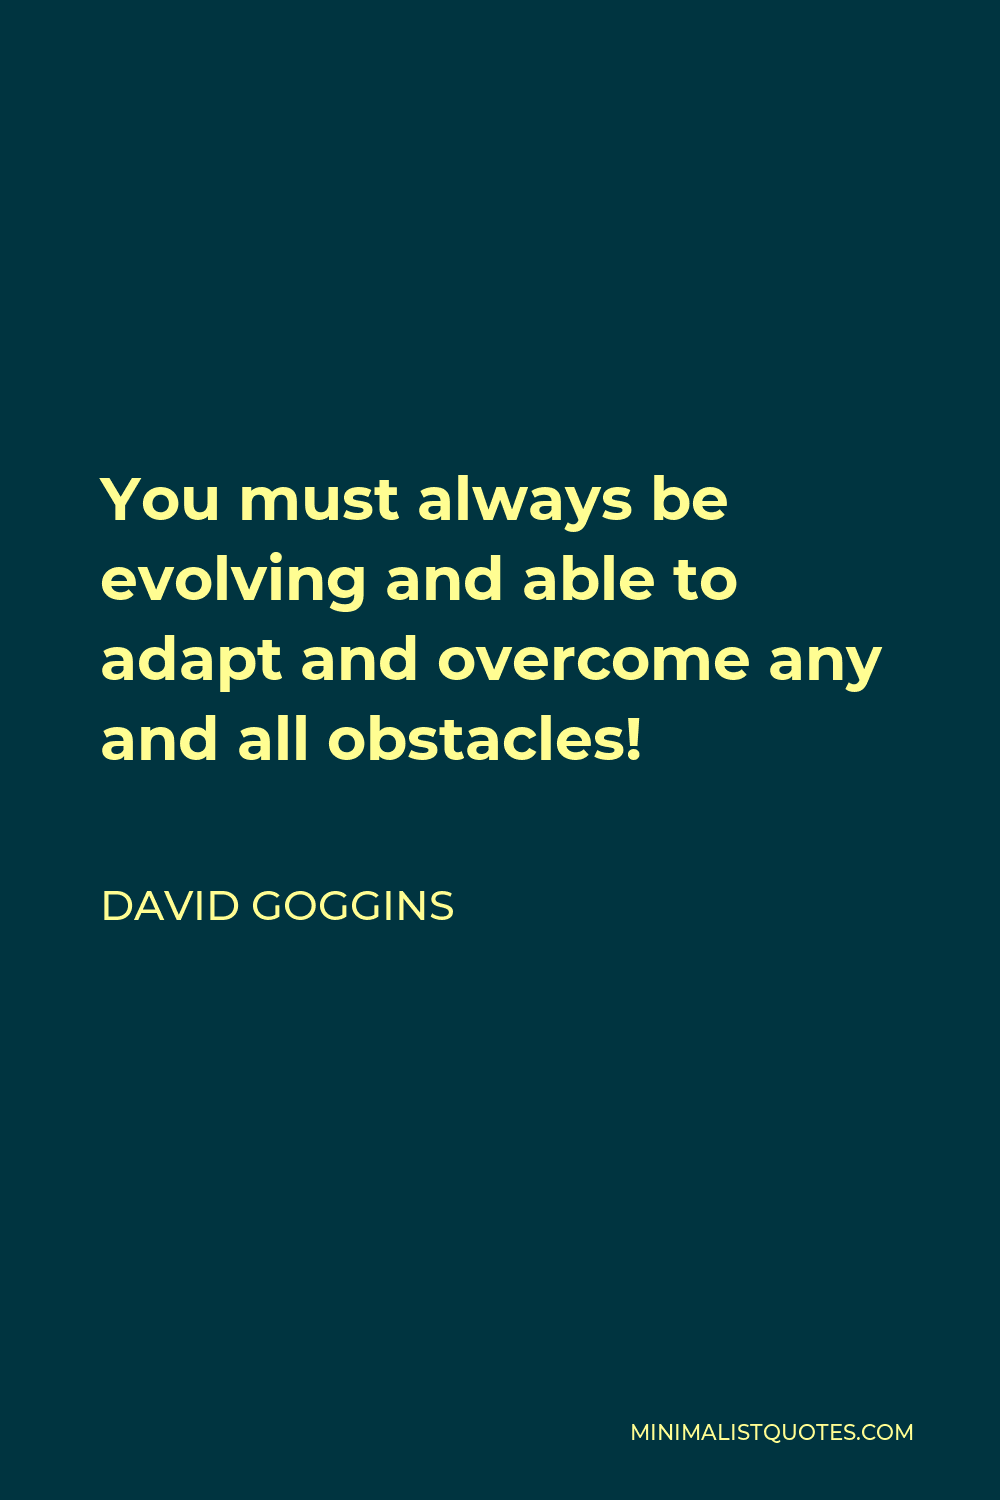 David Goggins Quote - You must always be evolving and able to adapt and overcome any and all obstacles!